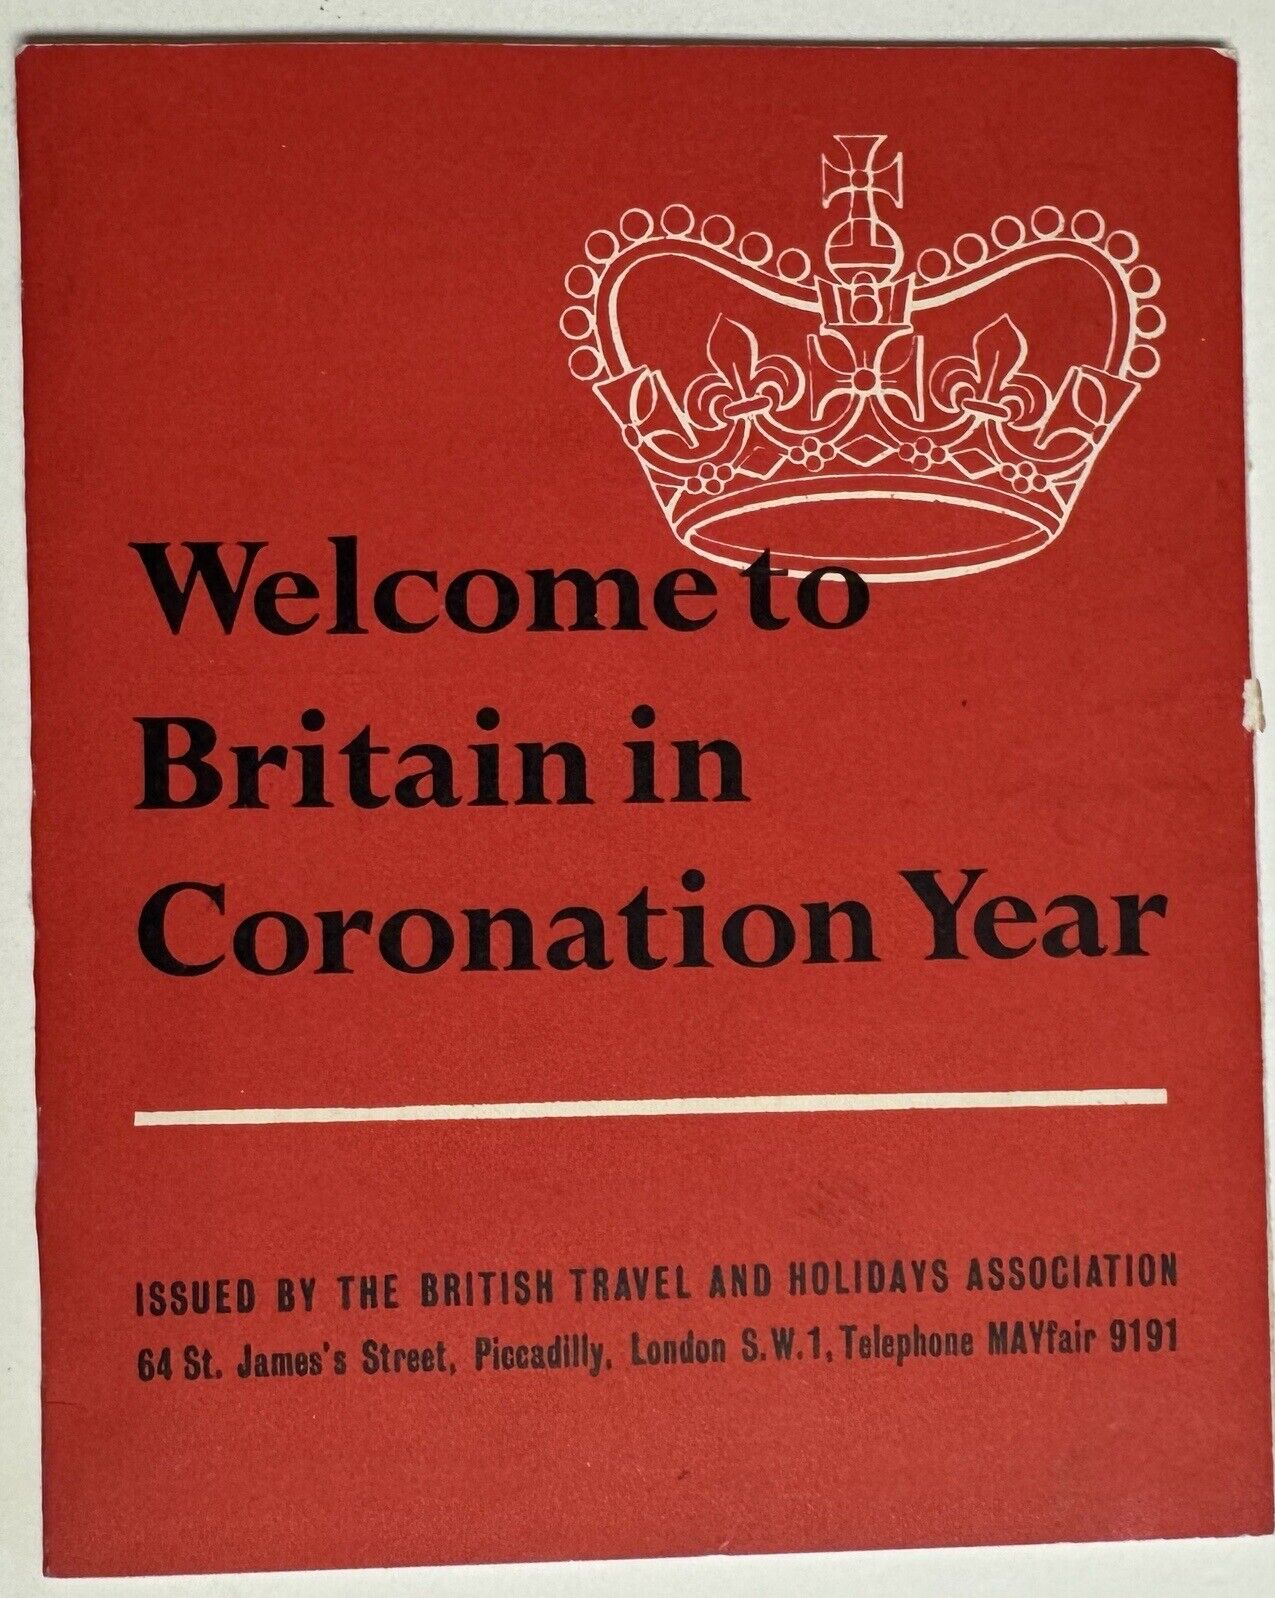 1954 British Travel Association Welcome To Britain in the Coronation Year Guide